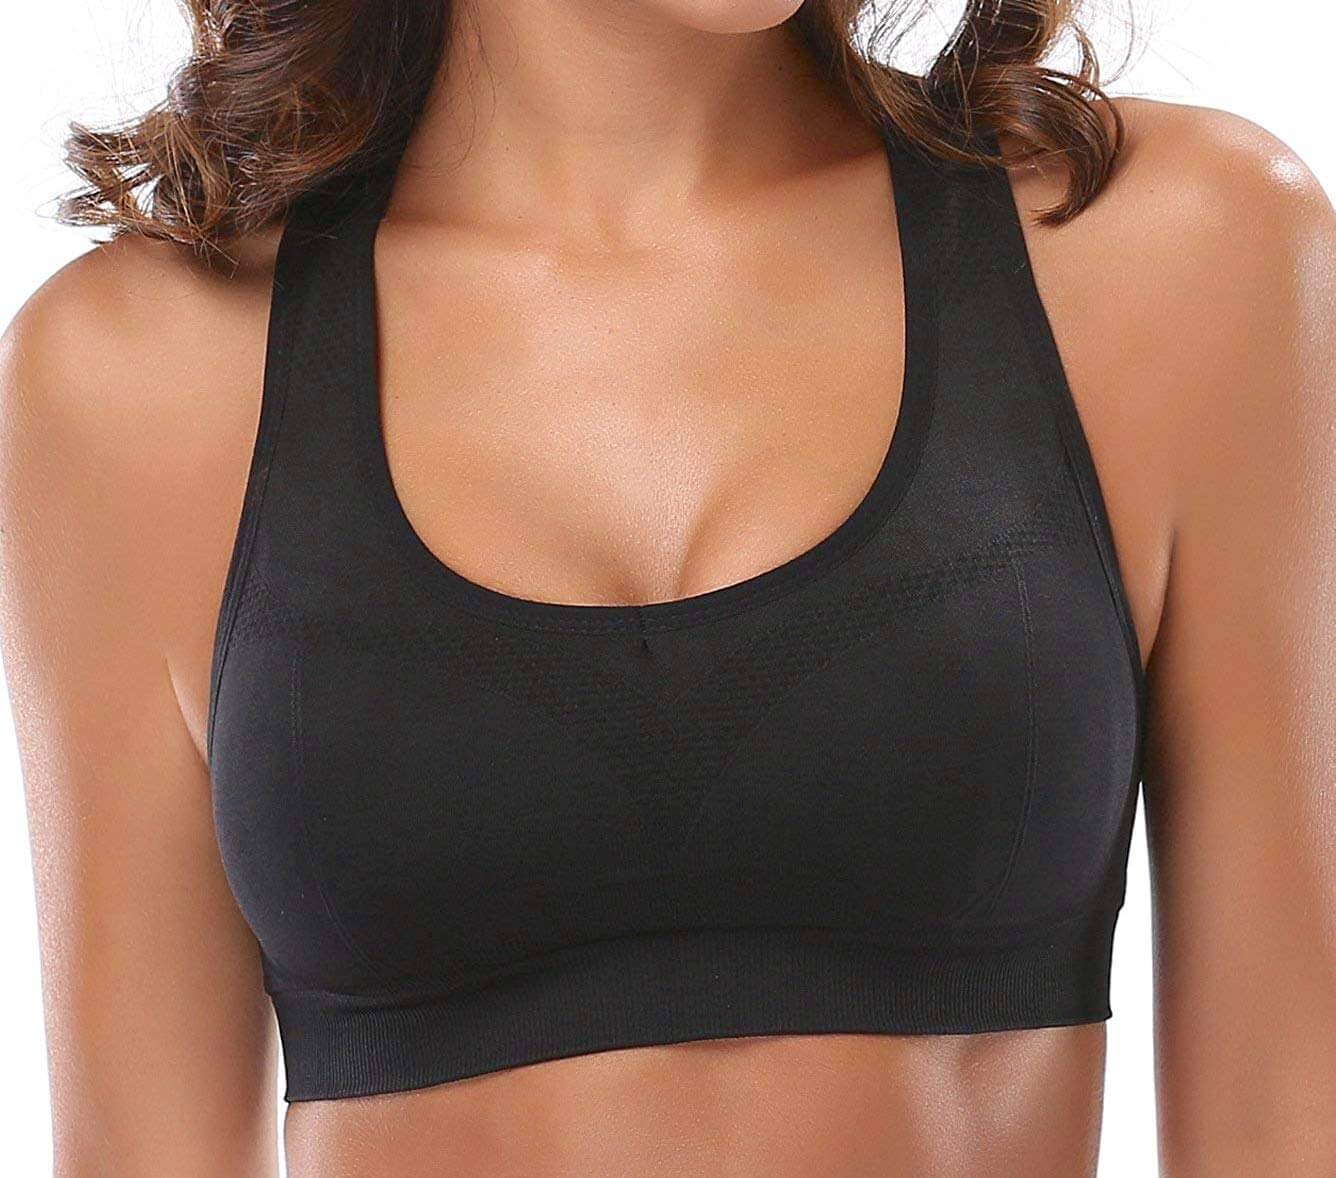 Racerback bra with contrasting-coloured elastic band